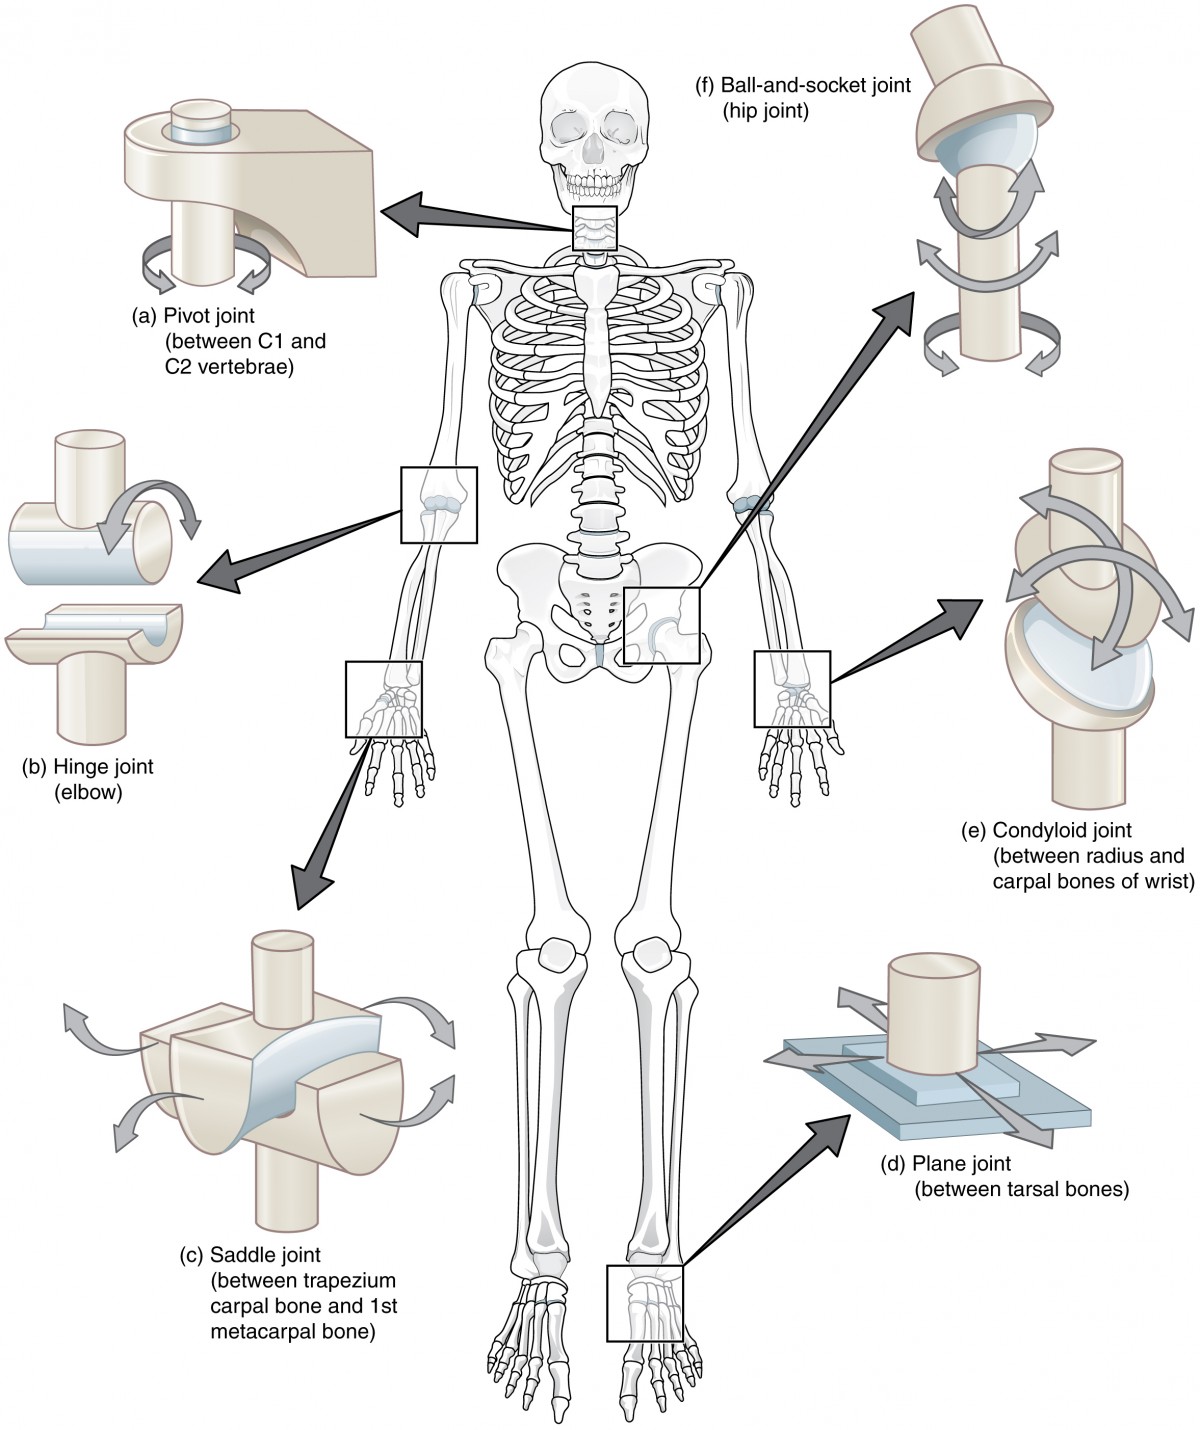 This composite image shows the different types of synovial joints in the body. In the center of the figure is a skeleton, and call outs from each joint show their names and locations.